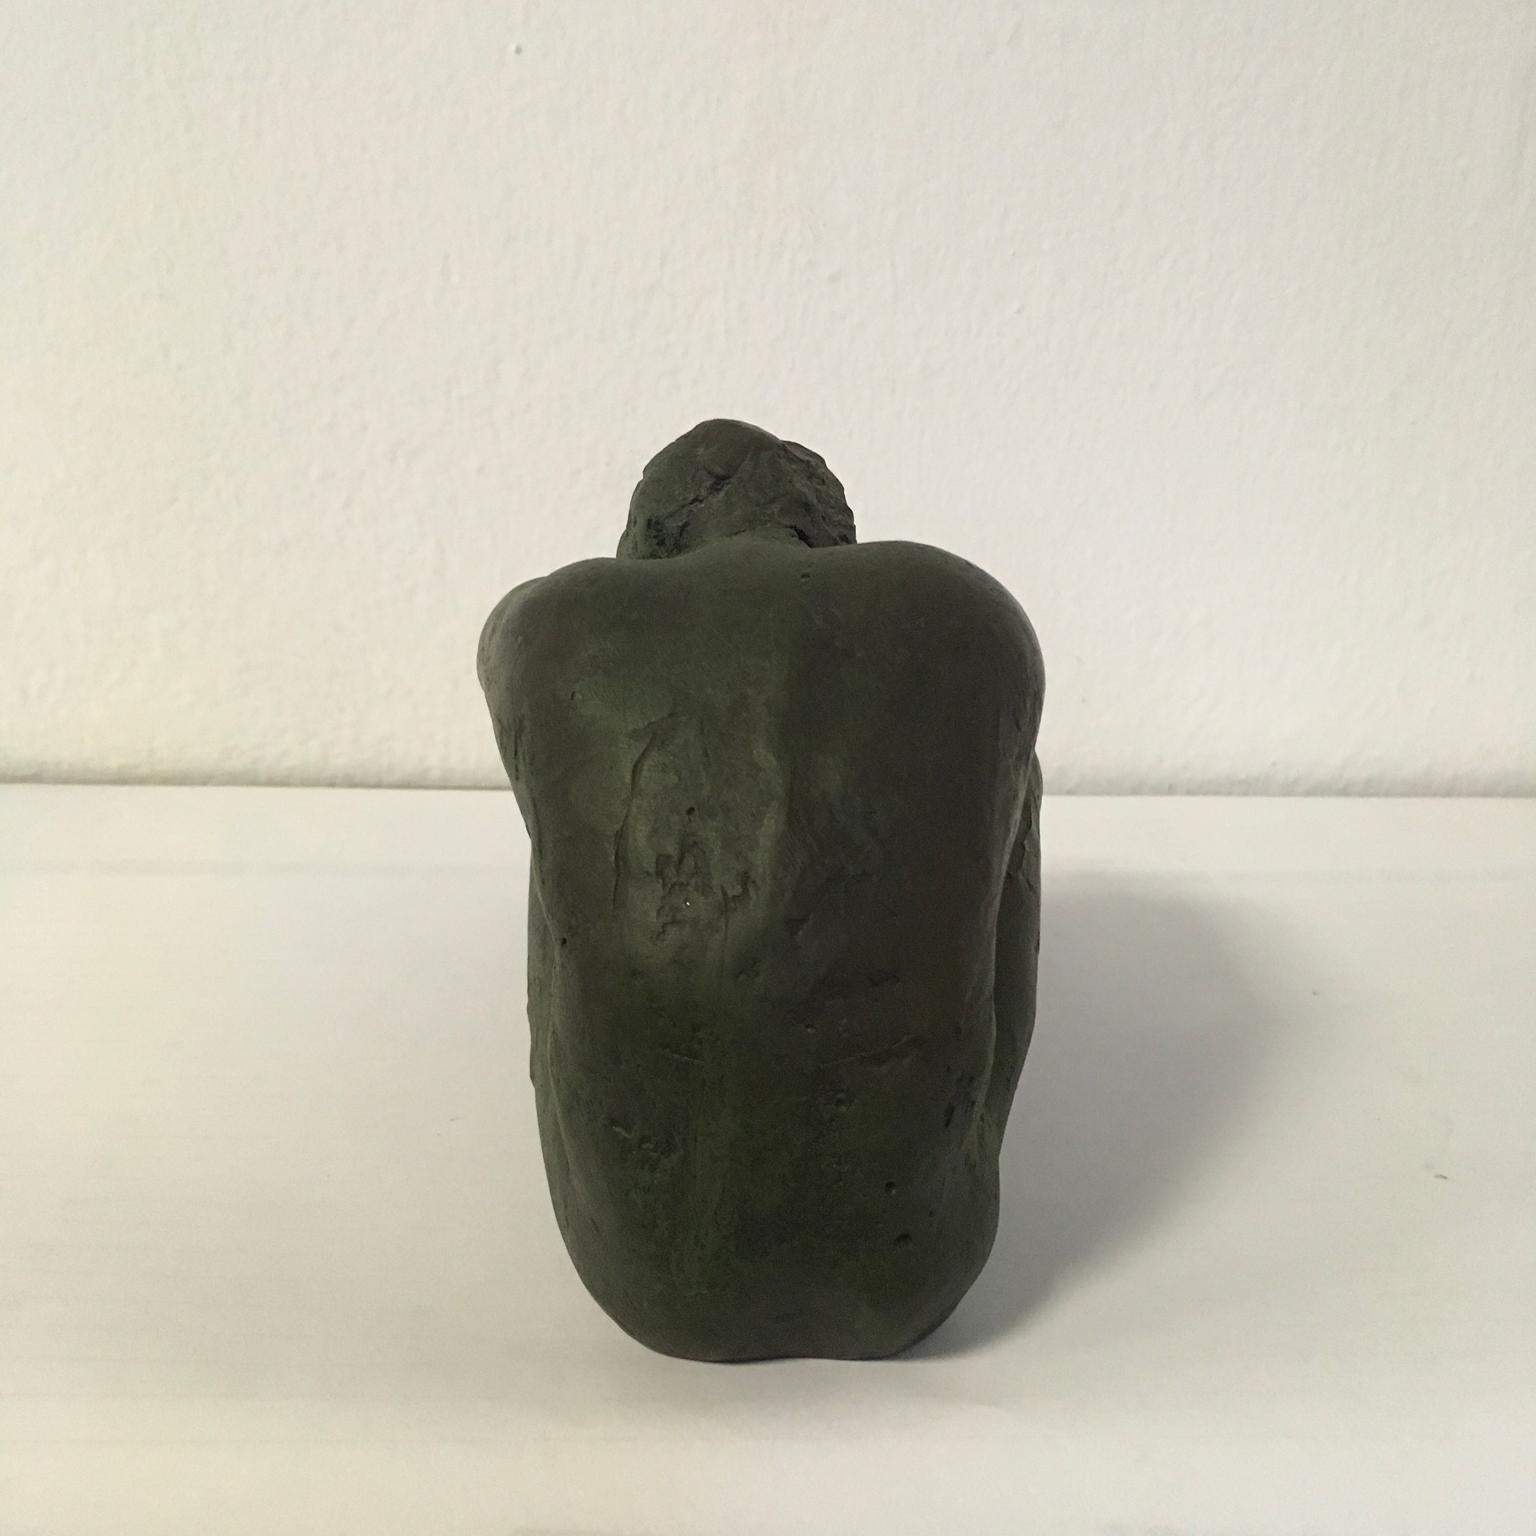 Bronze artwork made with lost wax casting technique. This is the prototype, unique signed artist proof. 
Sergio Monari is an Italian sculpture, that lives and works in Bologna, Italy. 
He exhibited his artworks in the best Galleries in Italy and